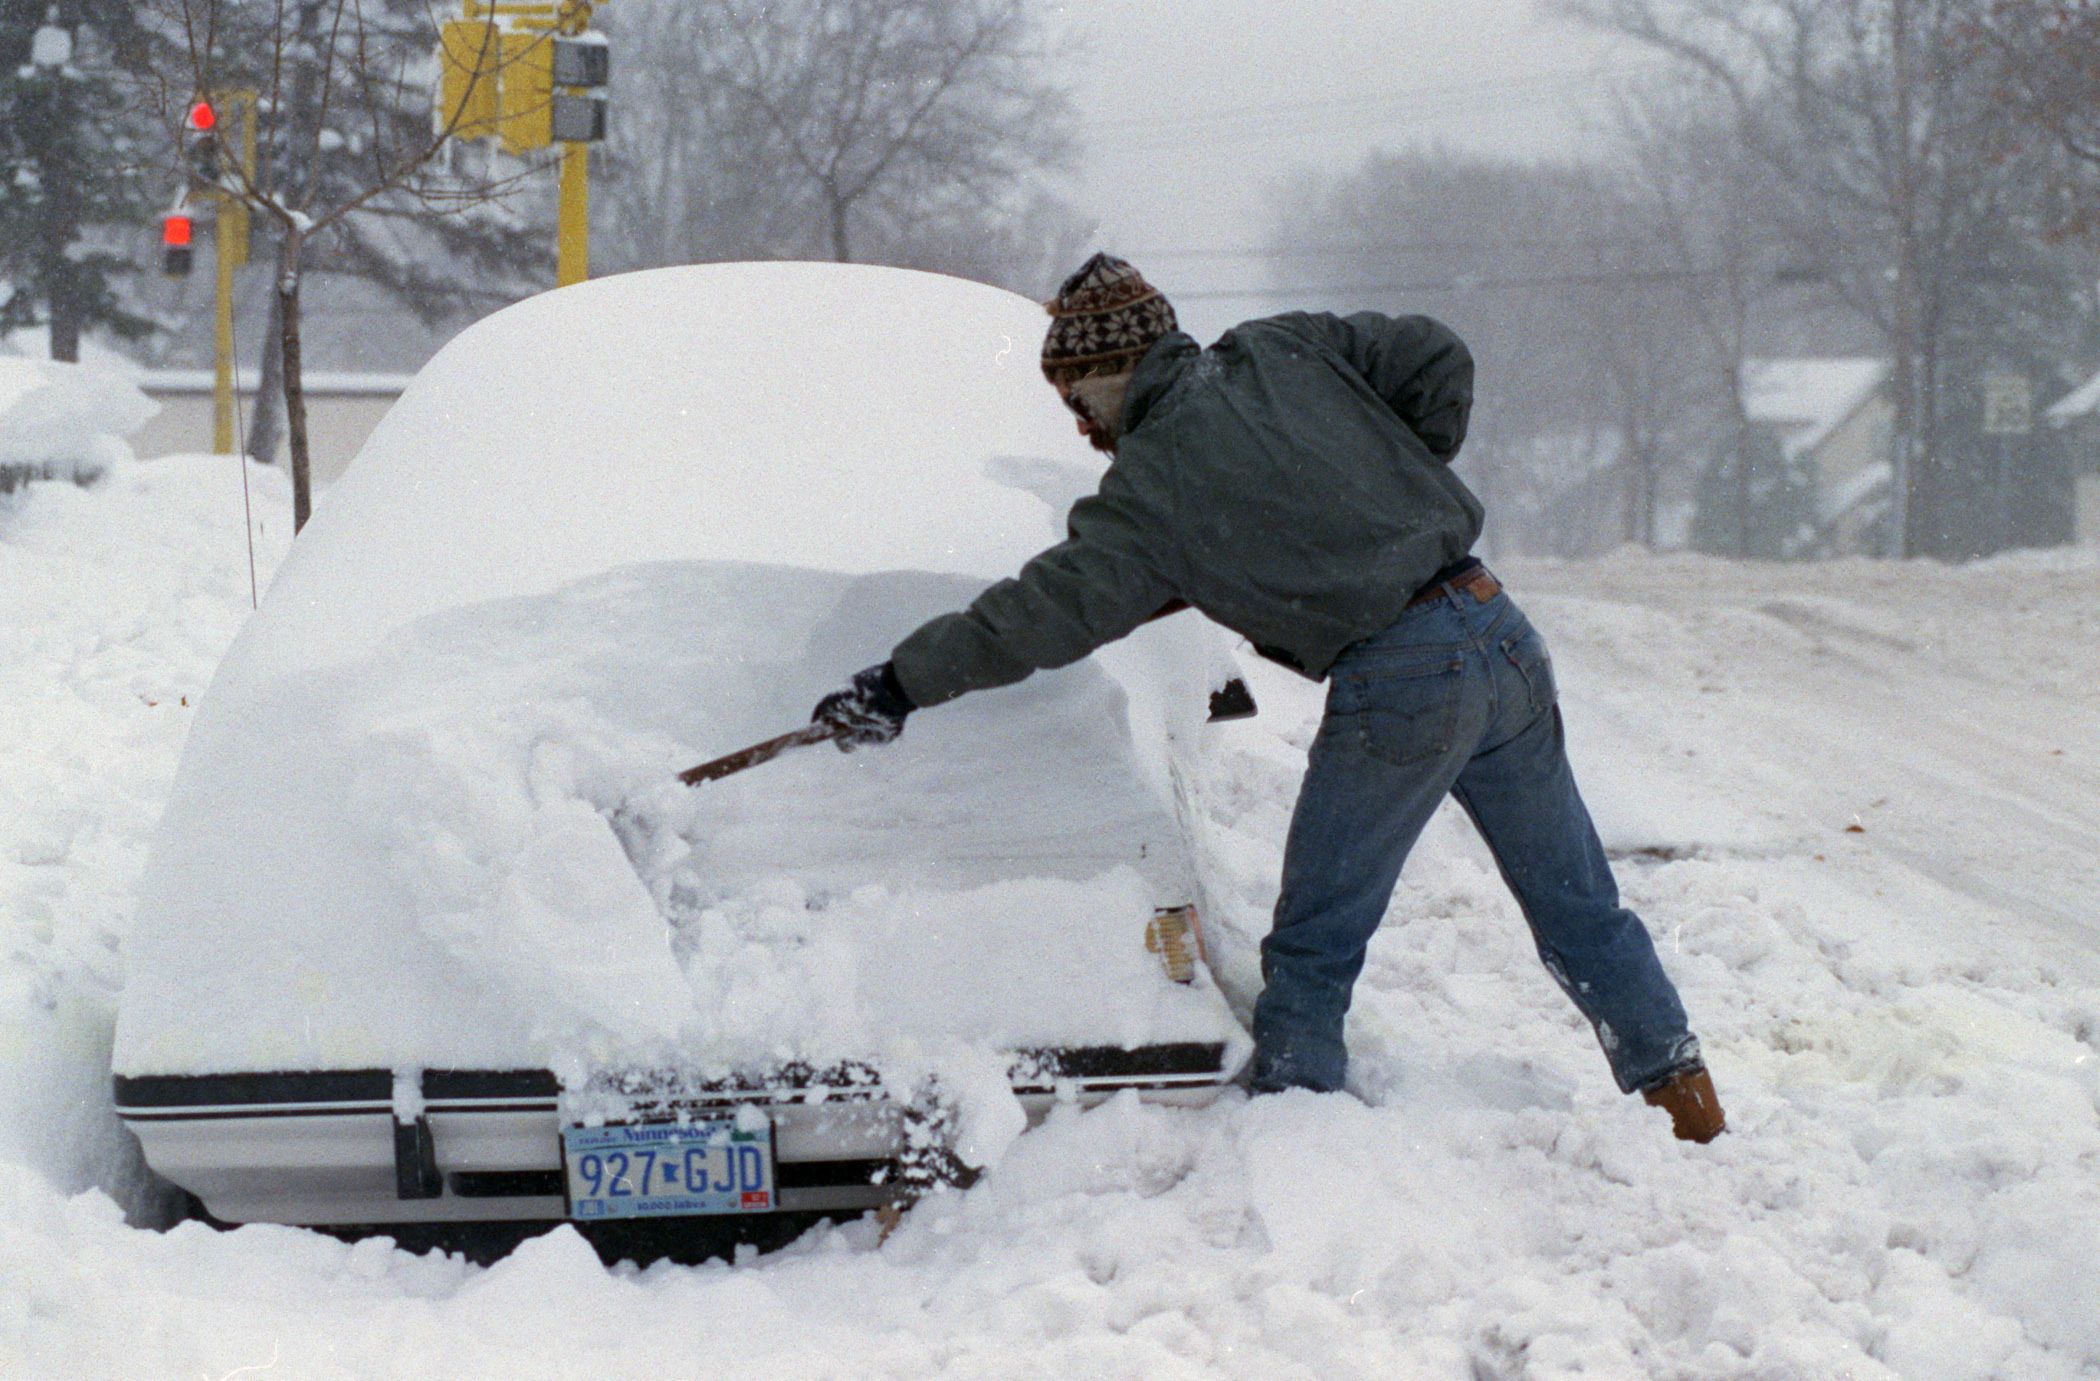 A man digging his car out of snow.